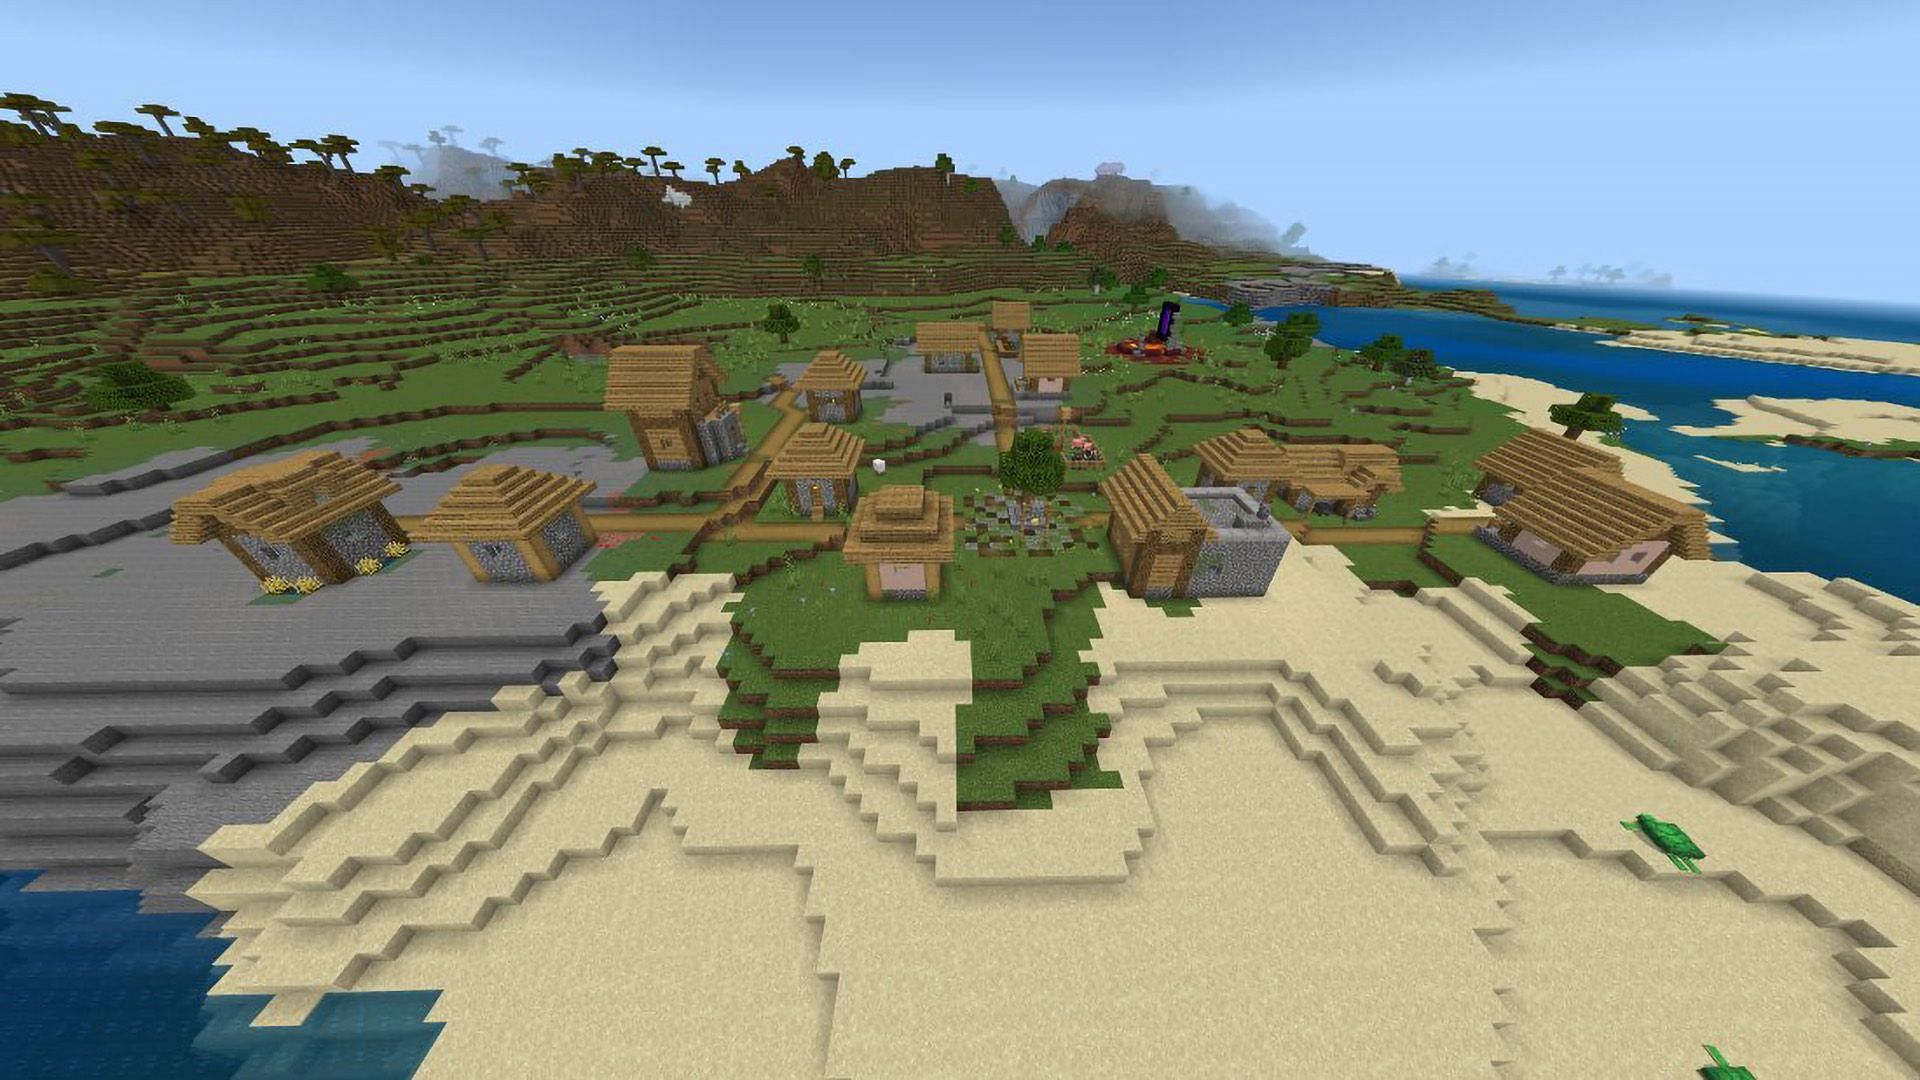 Swim ashore to discover the secrets this Minecraft village holds (Image via Mojang)